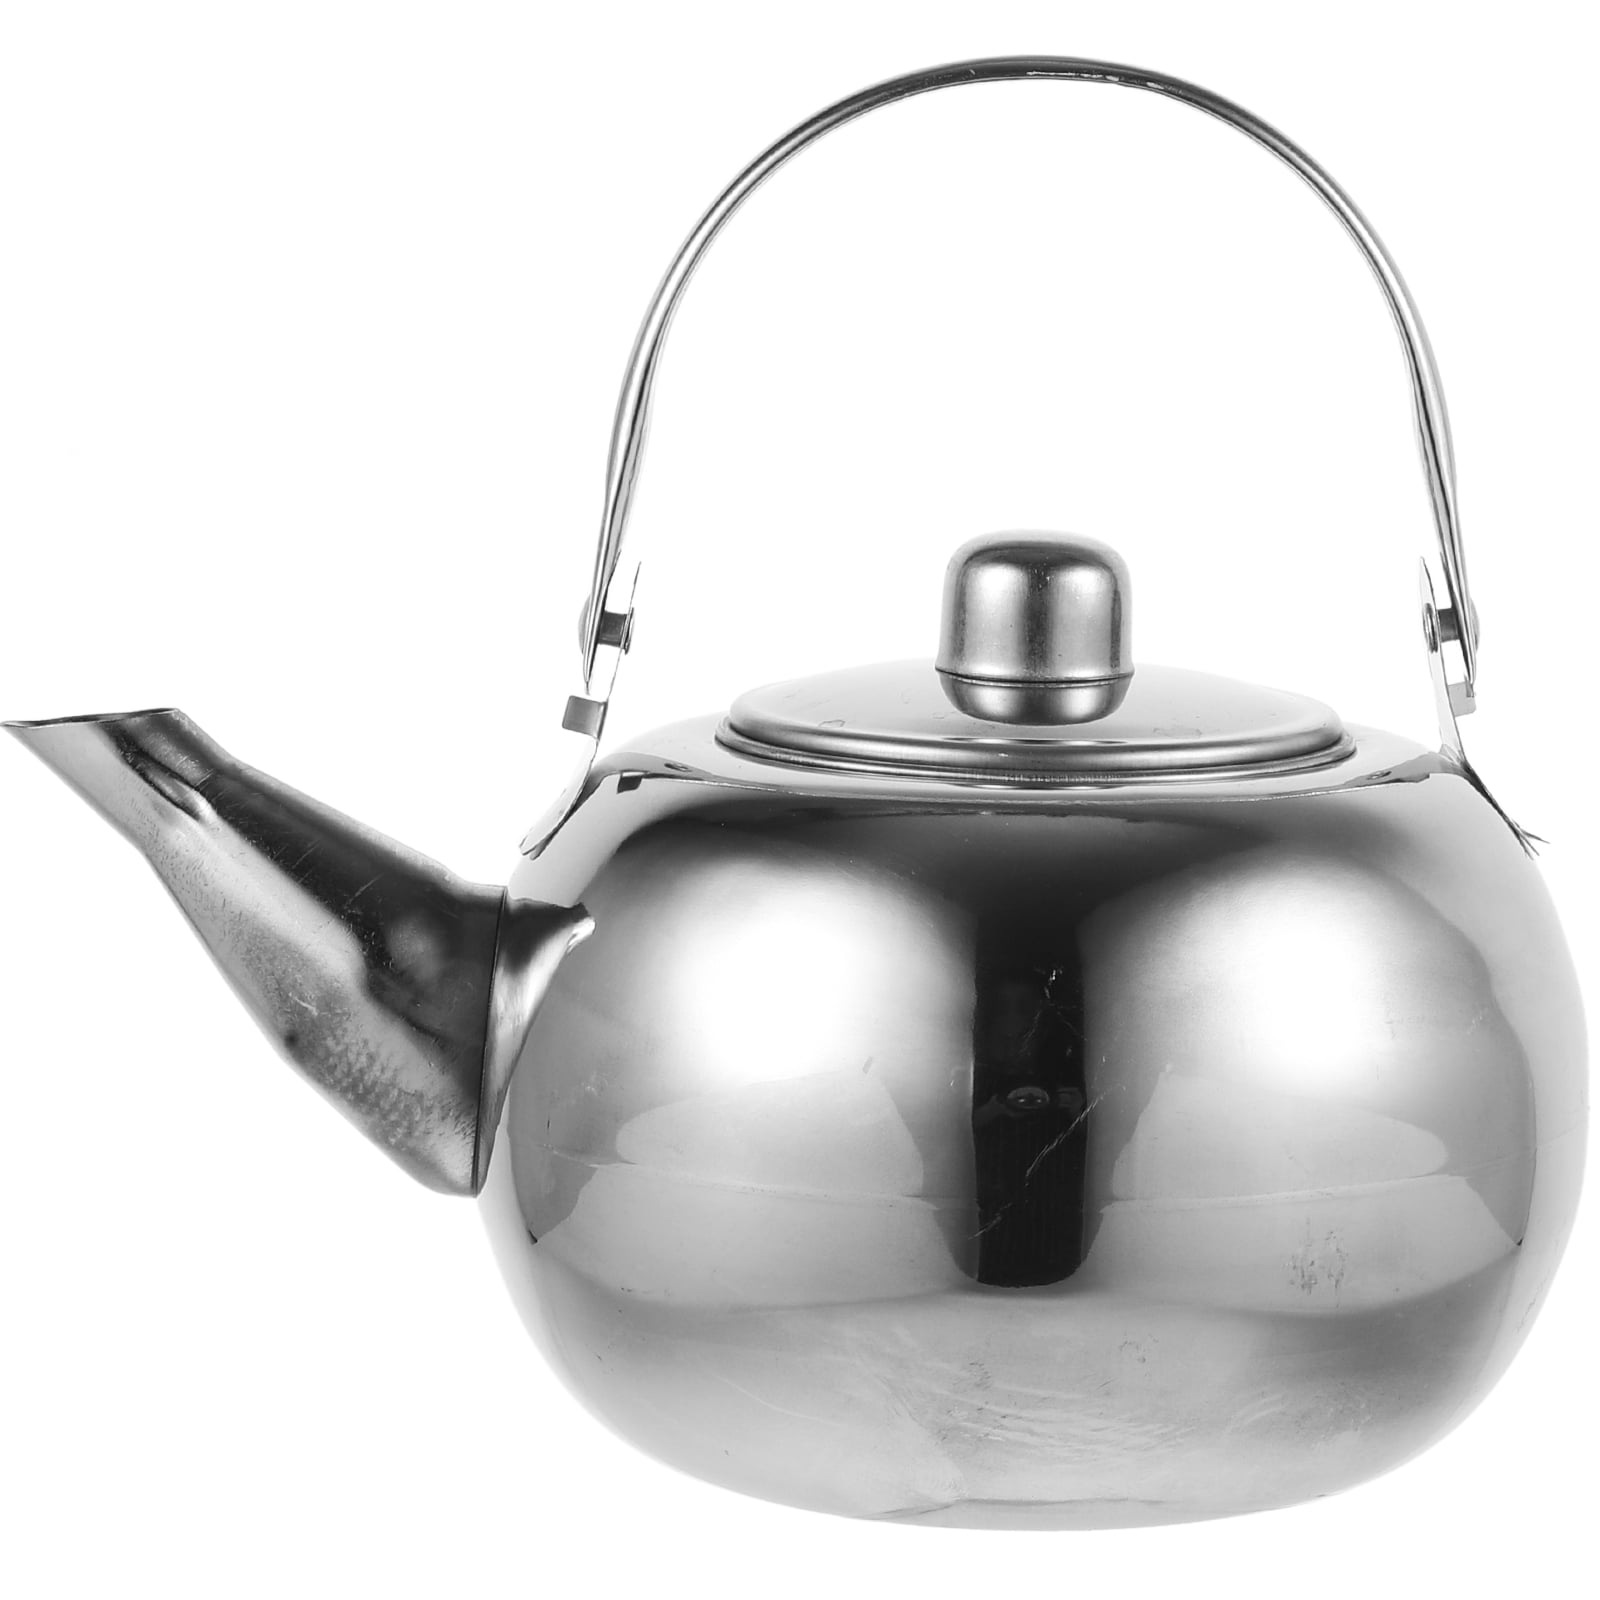 Thick Stainless Steel Tea Pot Insulated Kettle Thermal Teapot Water Pot for Kitchen Restaurant Hotel (Silver, 1L), Size: 18*14*18cm